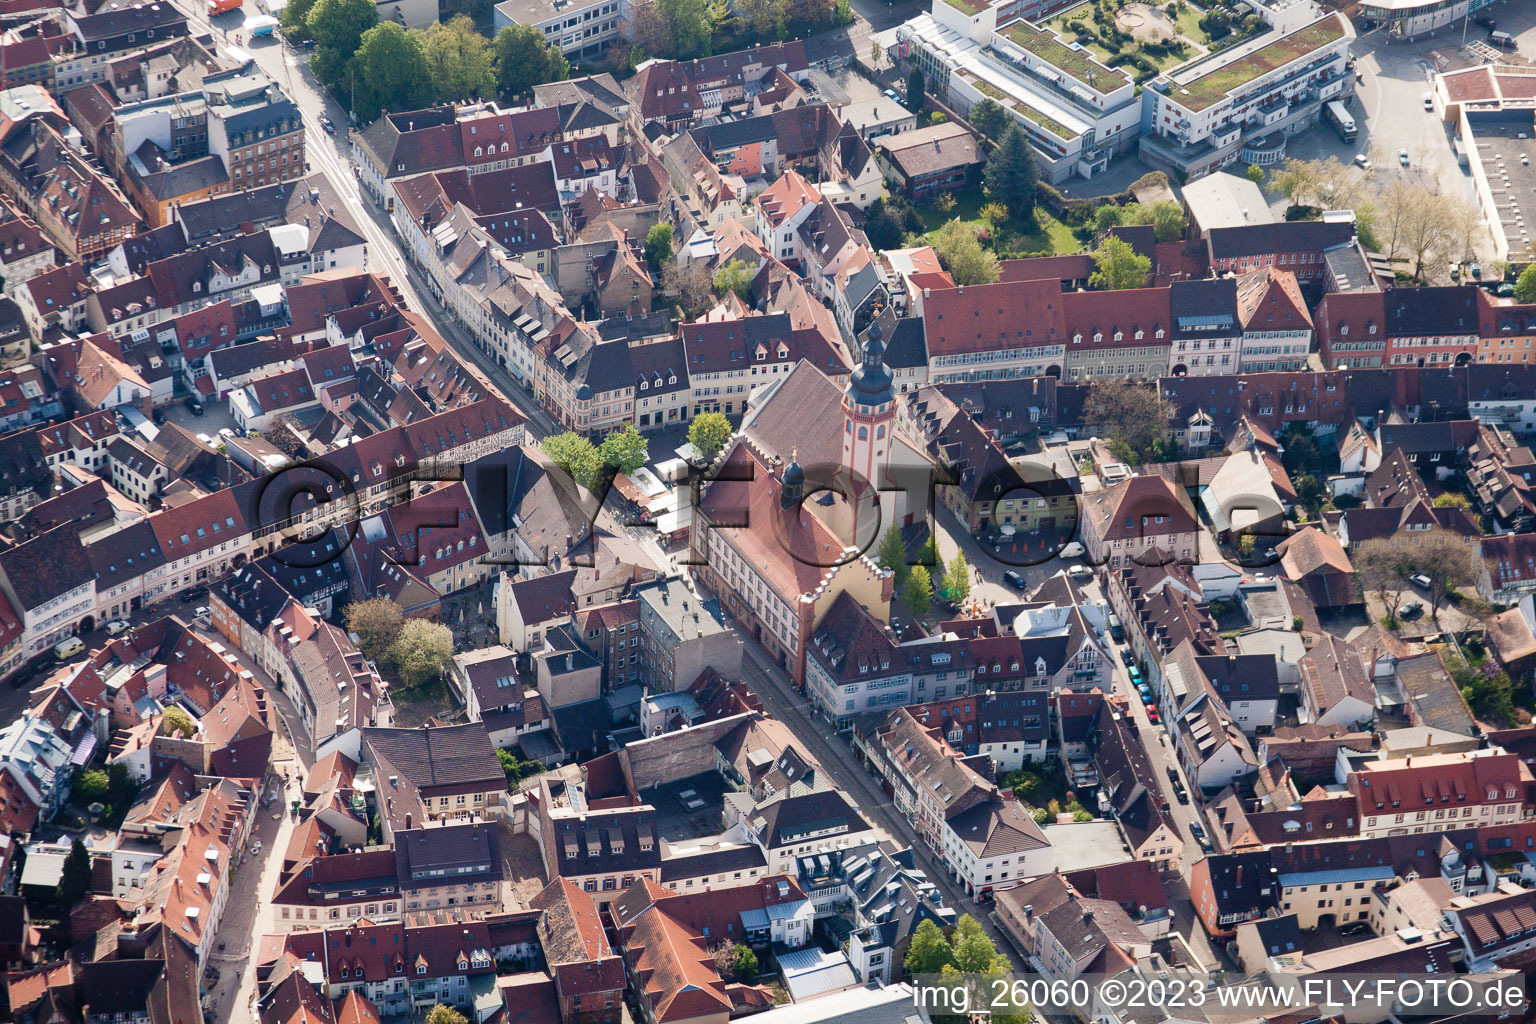 Aerial view of City church in the district Durlach in Karlsruhe in the state Baden-Wuerttemberg, Germany